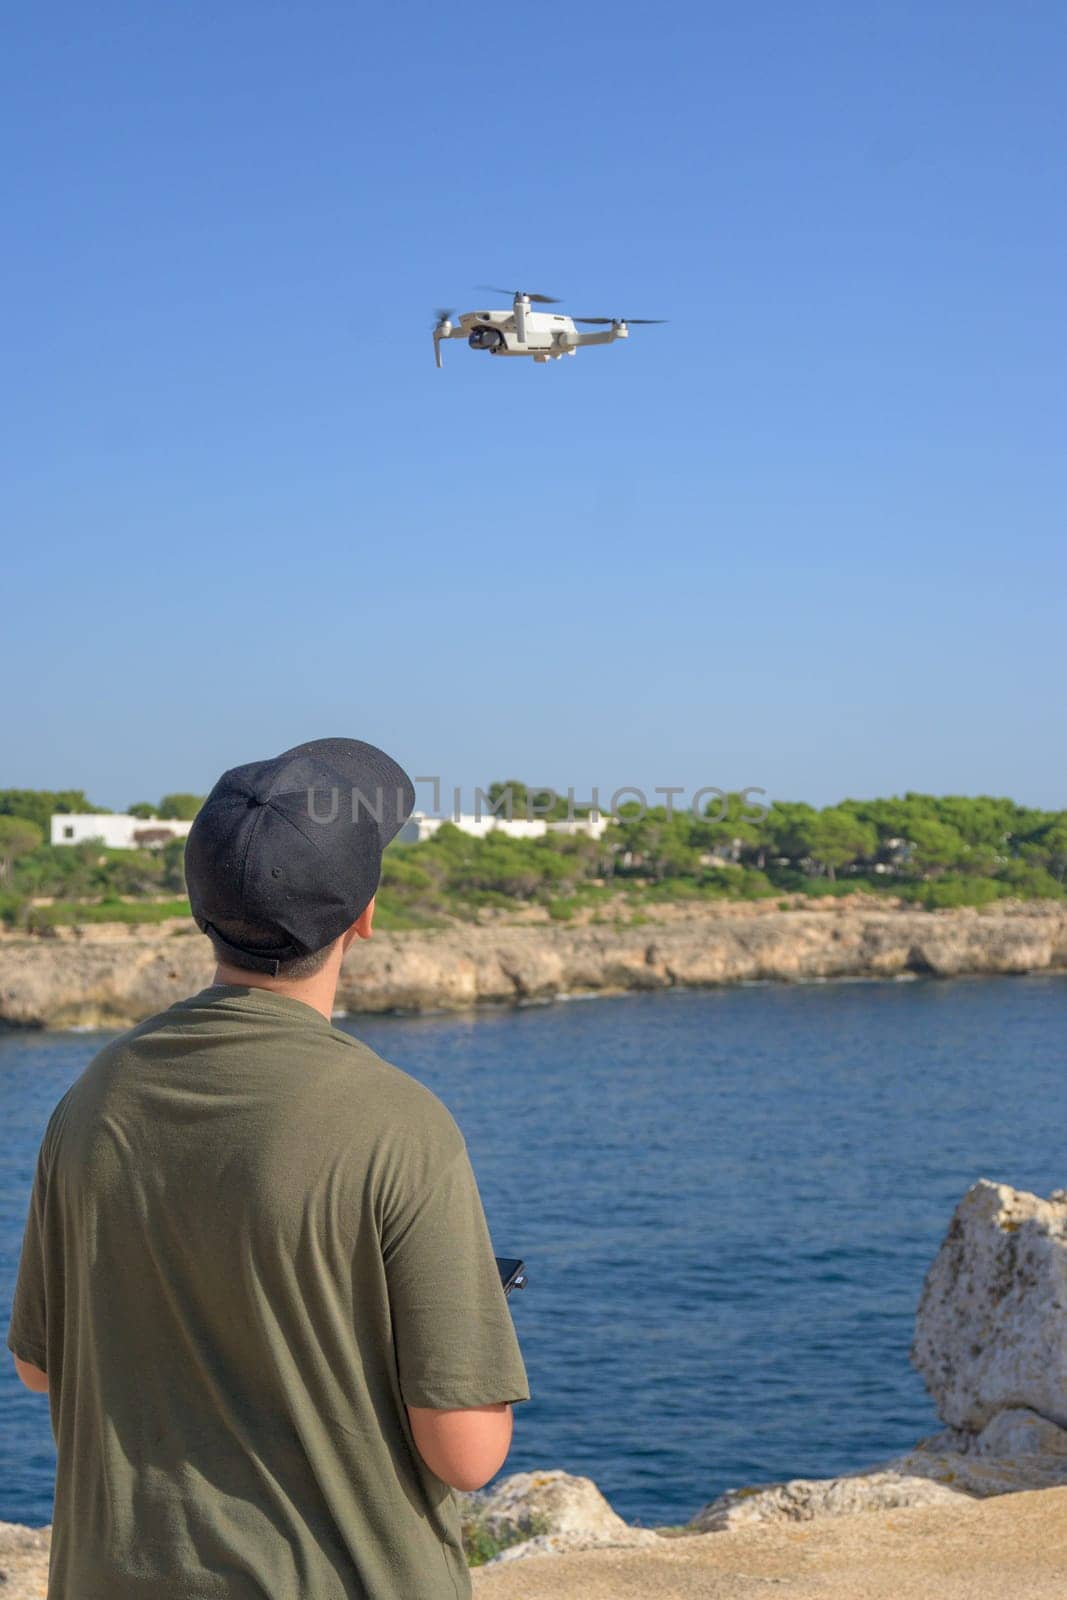 Rear view of teenage boy, flying drone on Mediterranean coast, against blue sky during sunny day Spain, Balearic Islands